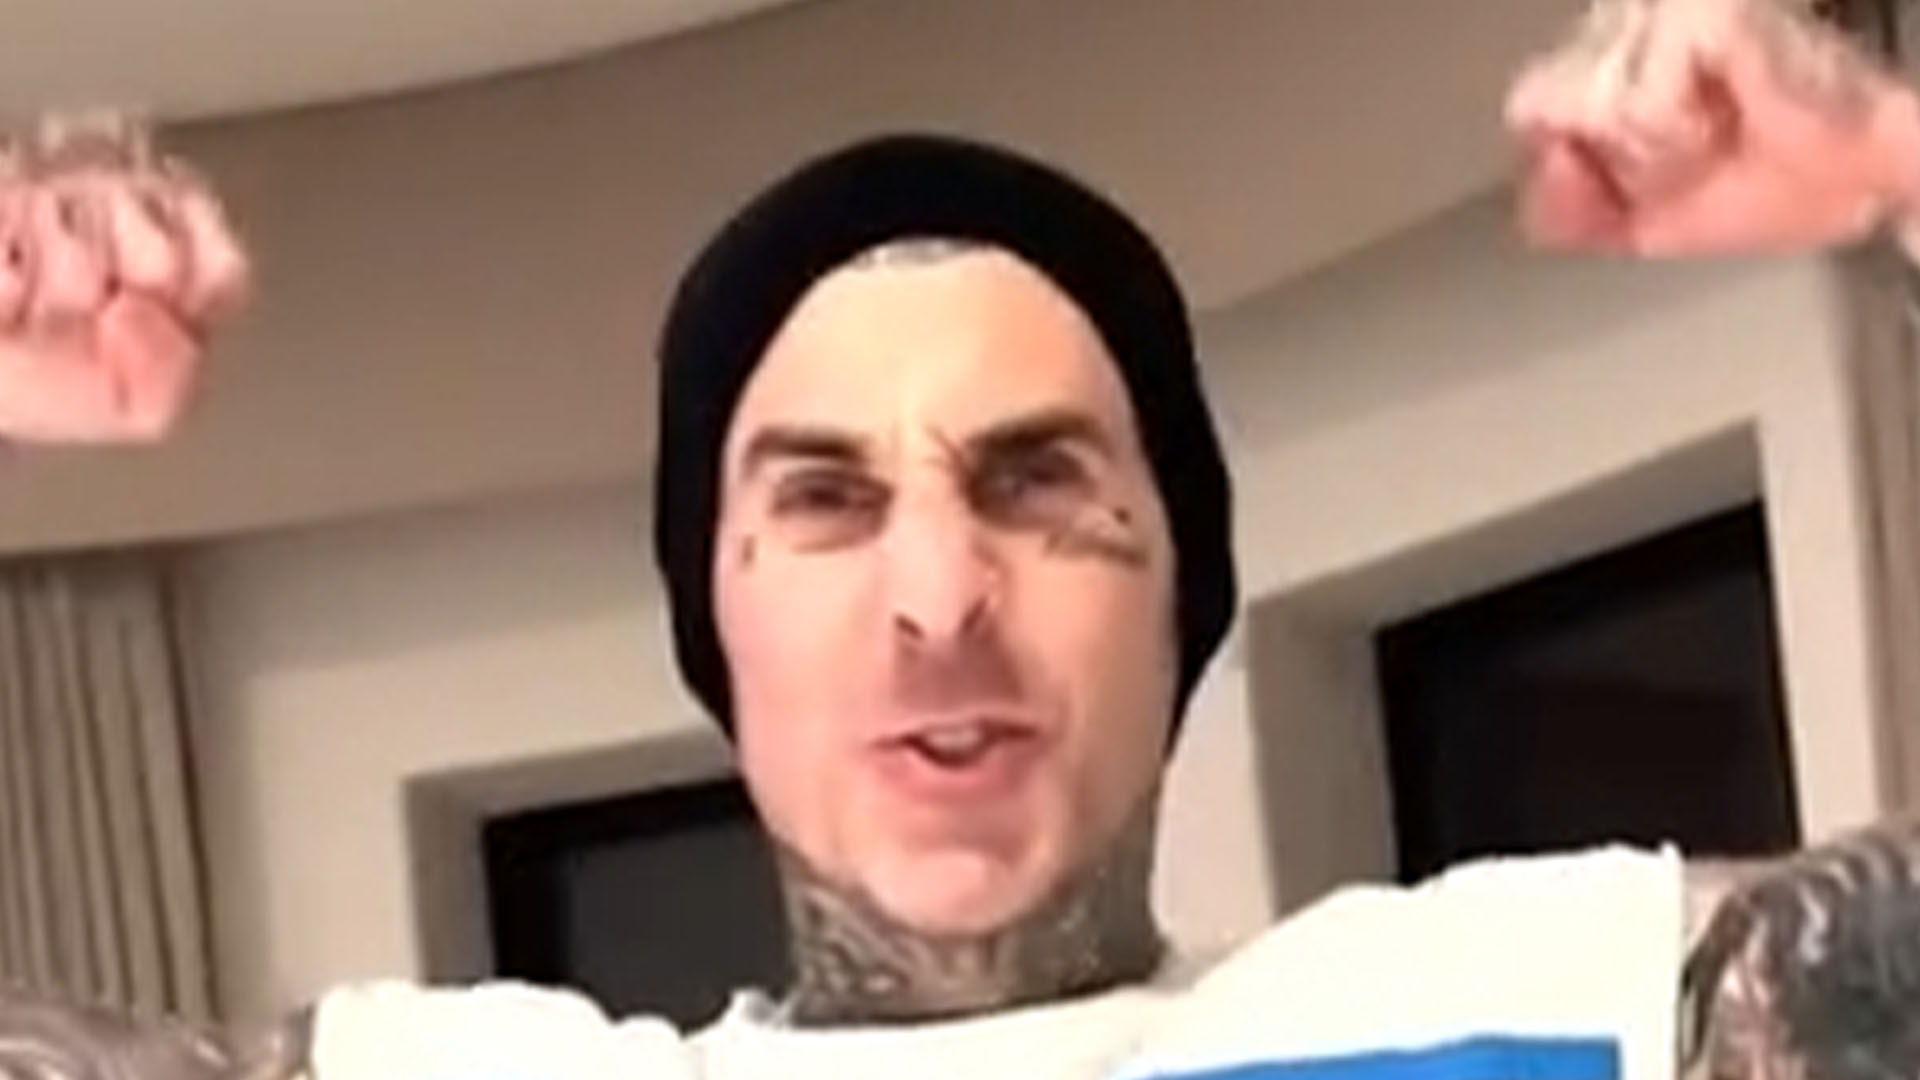 Travis Barker’s ‘vile’ shirt leaves Kardashian fans stunned as they call out drummer for ‘disgusting’ decision